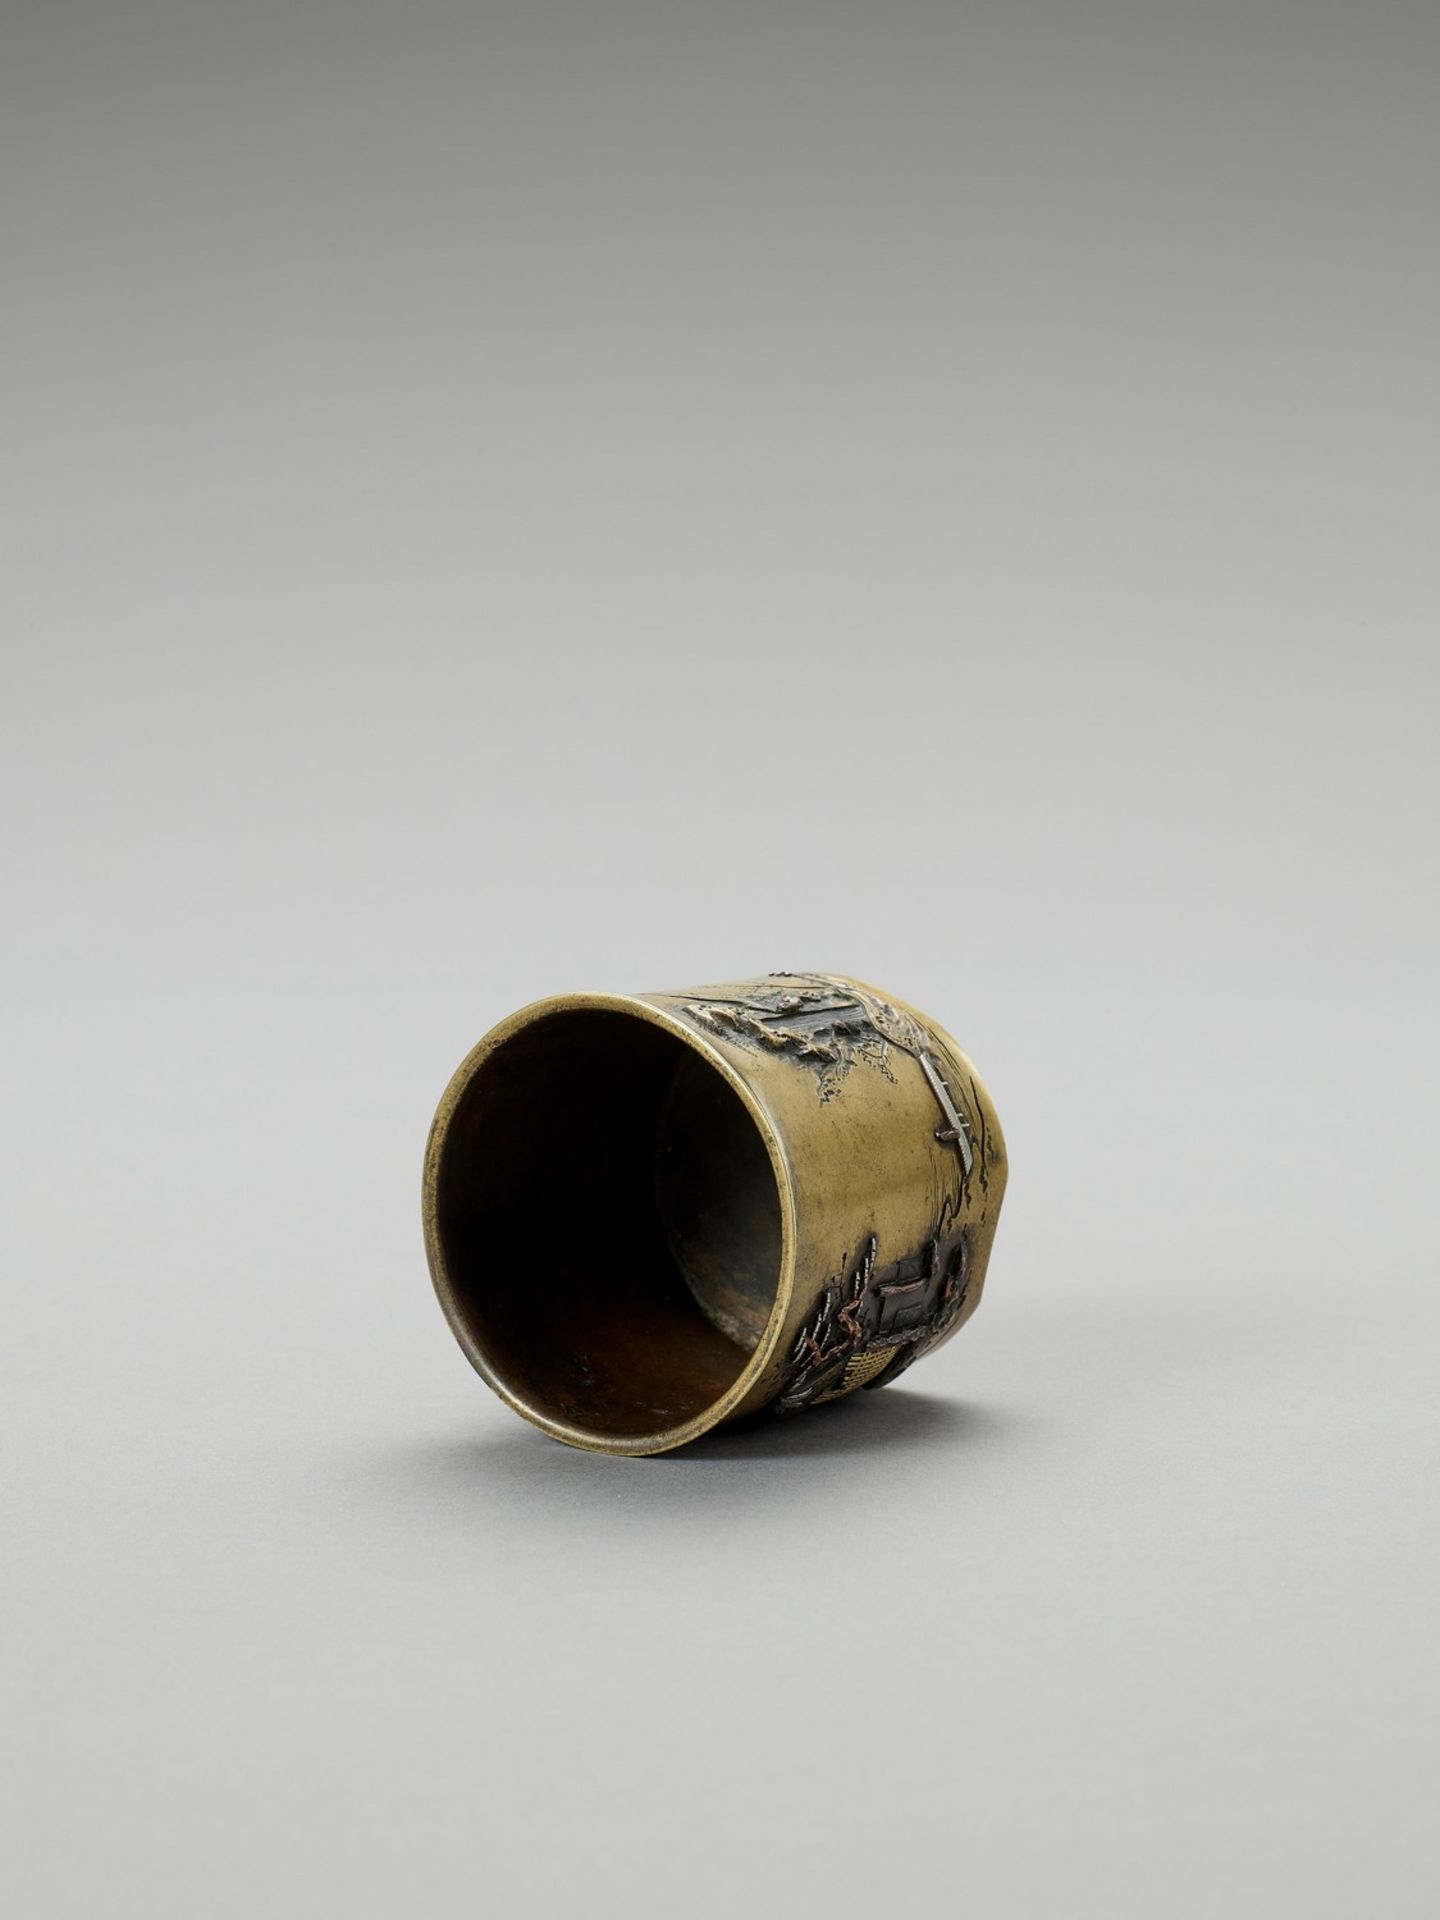 A SMALL SENTOKU VESSEL WITH SILVER AND COPPER INLAYS - Image 4 of 5